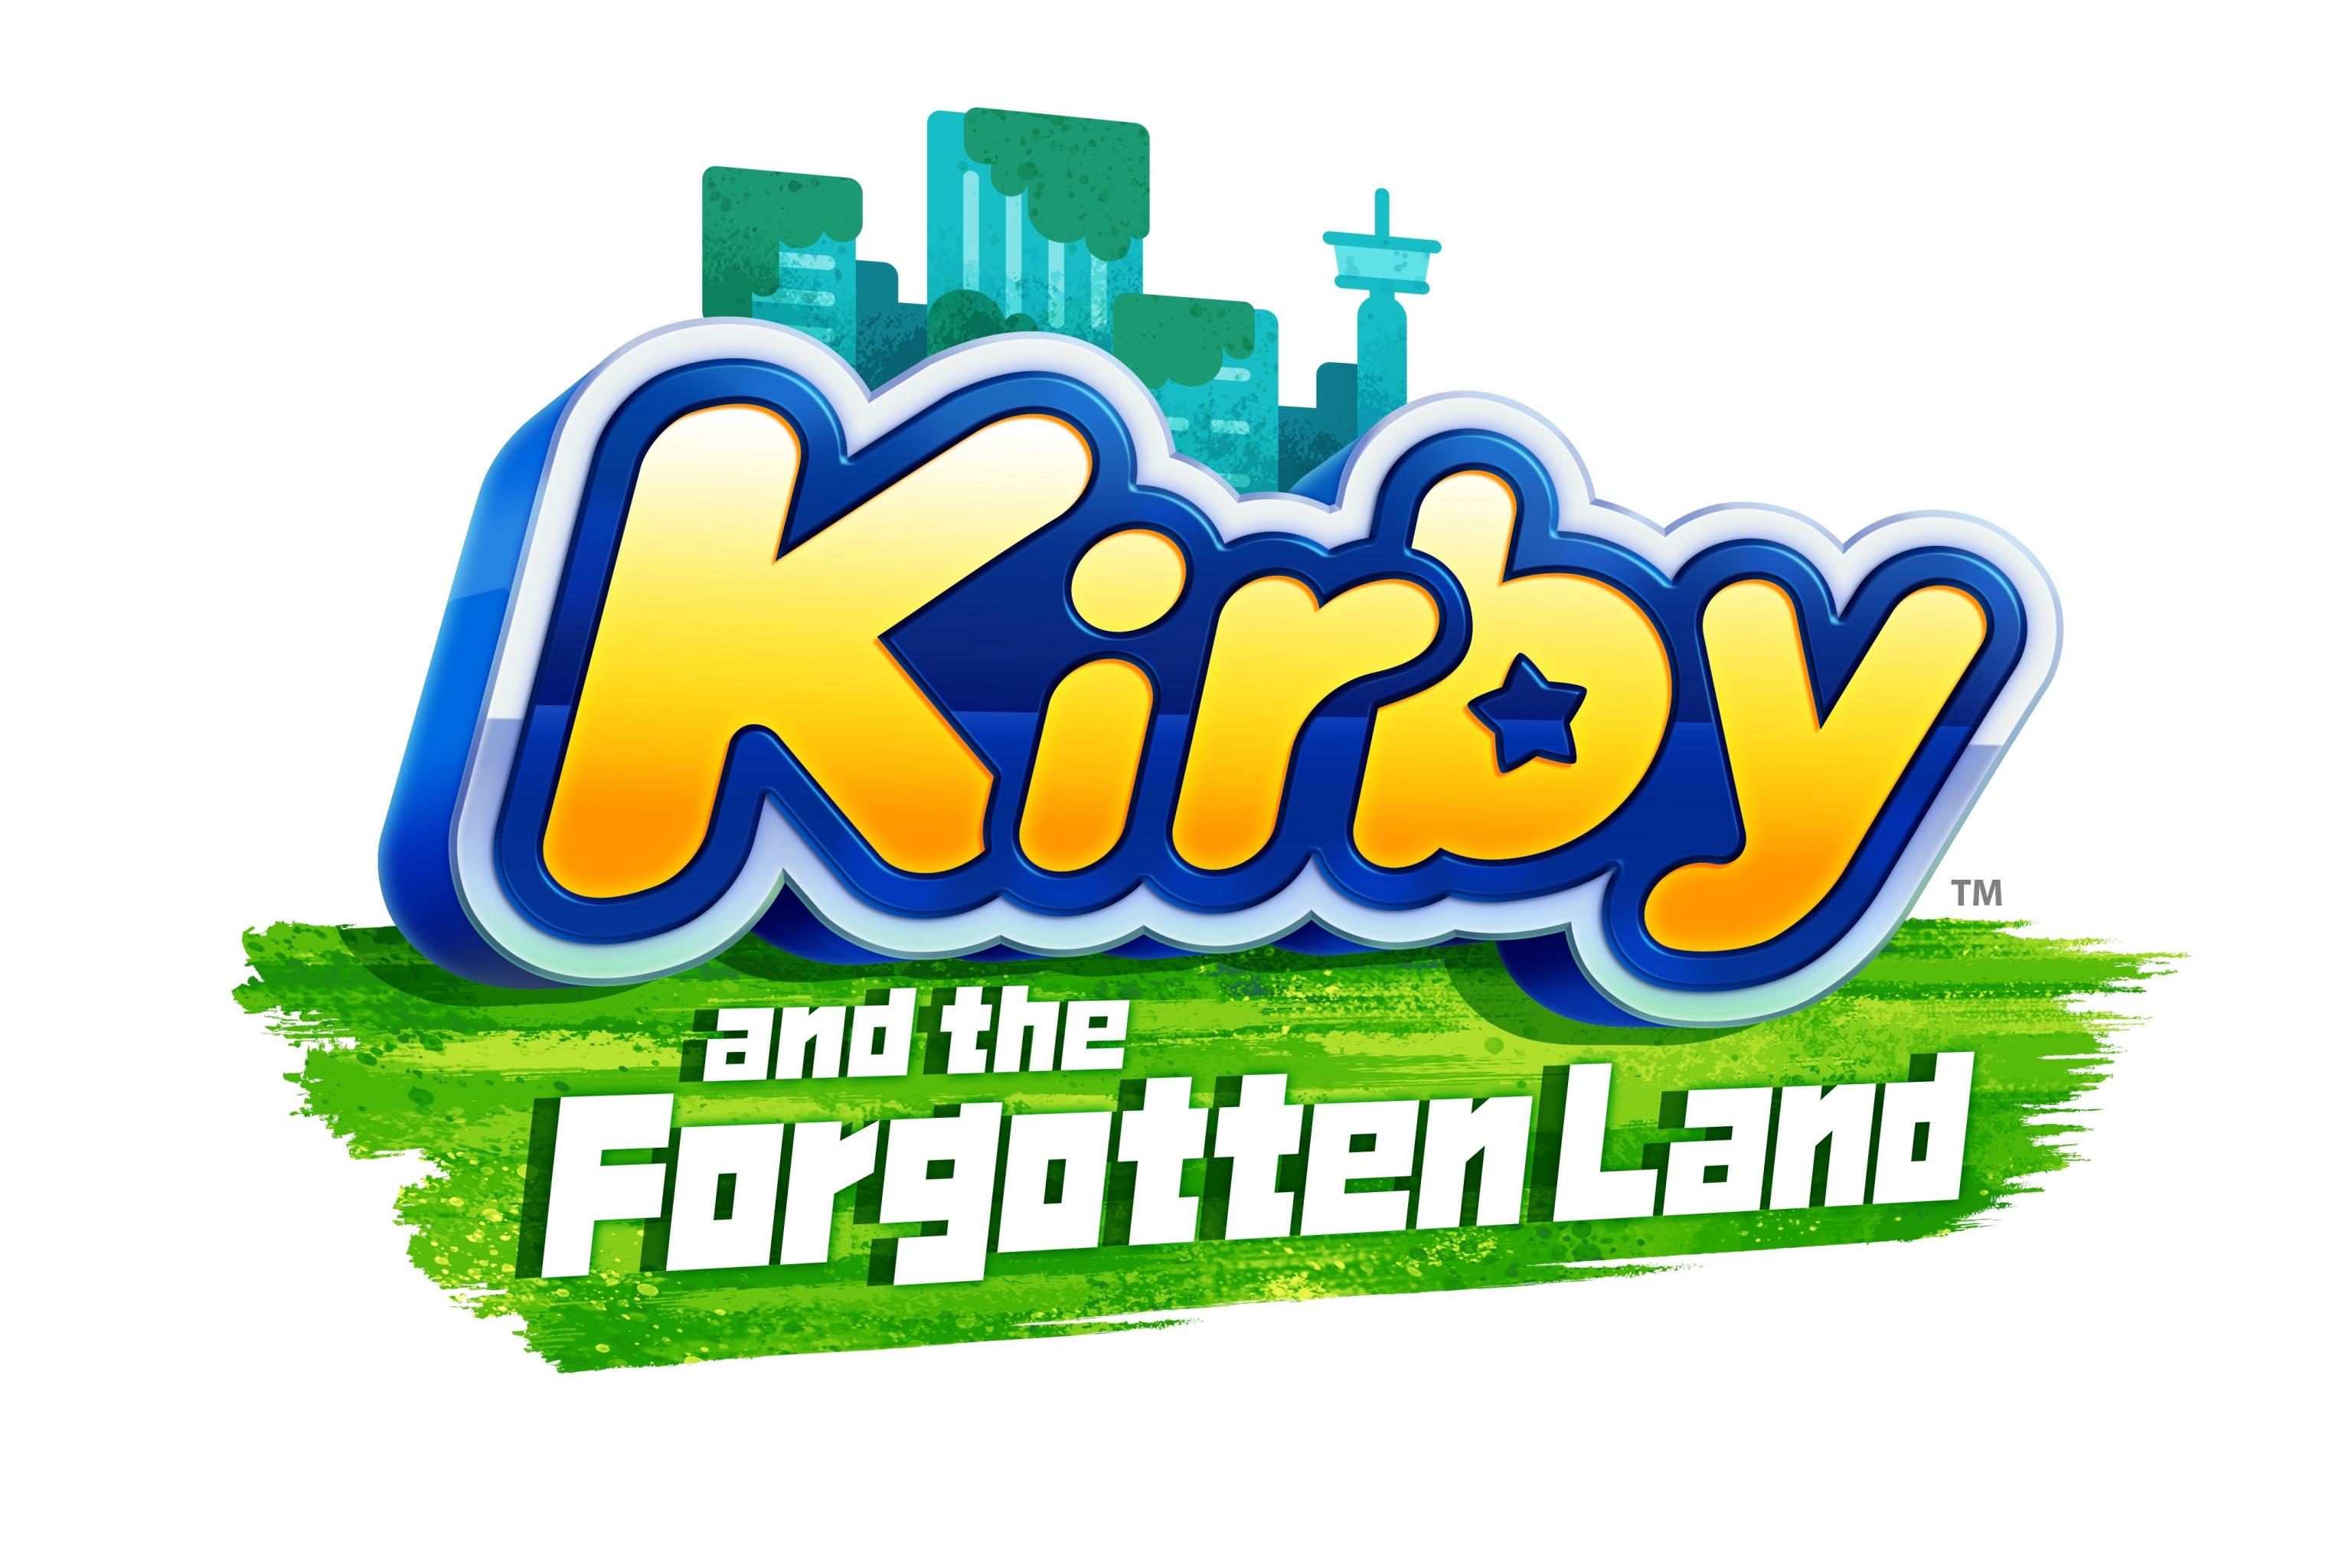 Kirby and the Forgotten Land goes down smooth like a Kirby game should